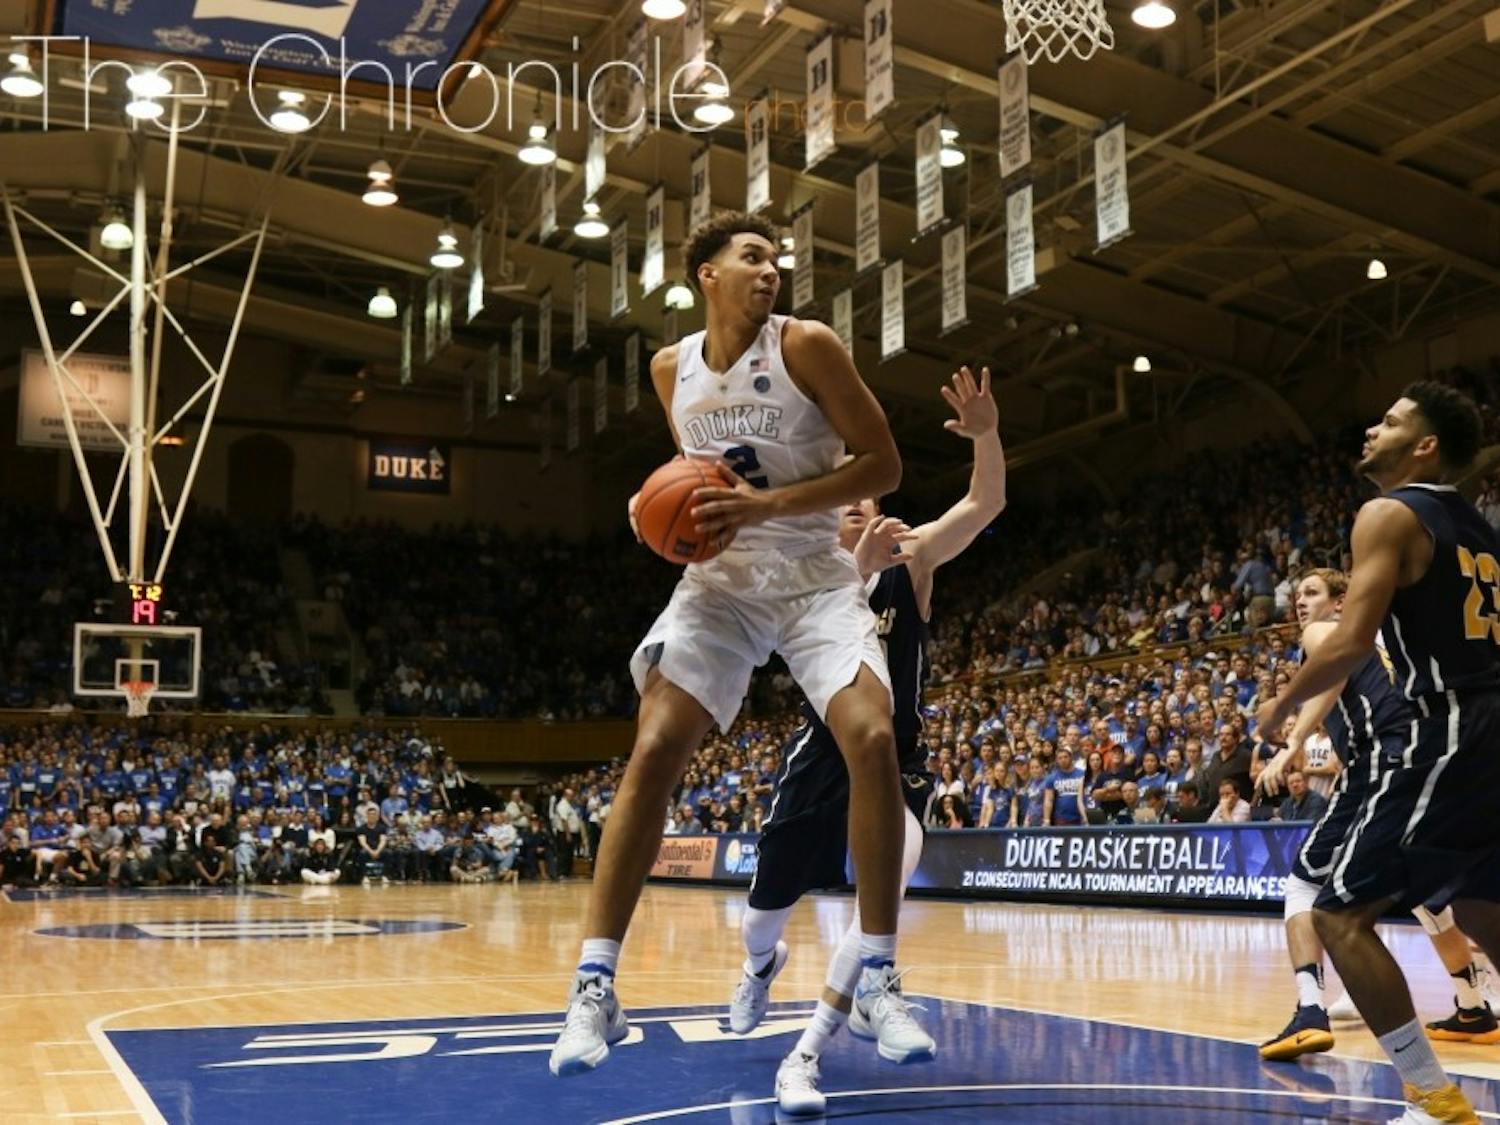 Chase Jeter had a double-double with 15 points and 12 rebounds Friday against Augustana and could start Duke first two regular-season games this weekend.